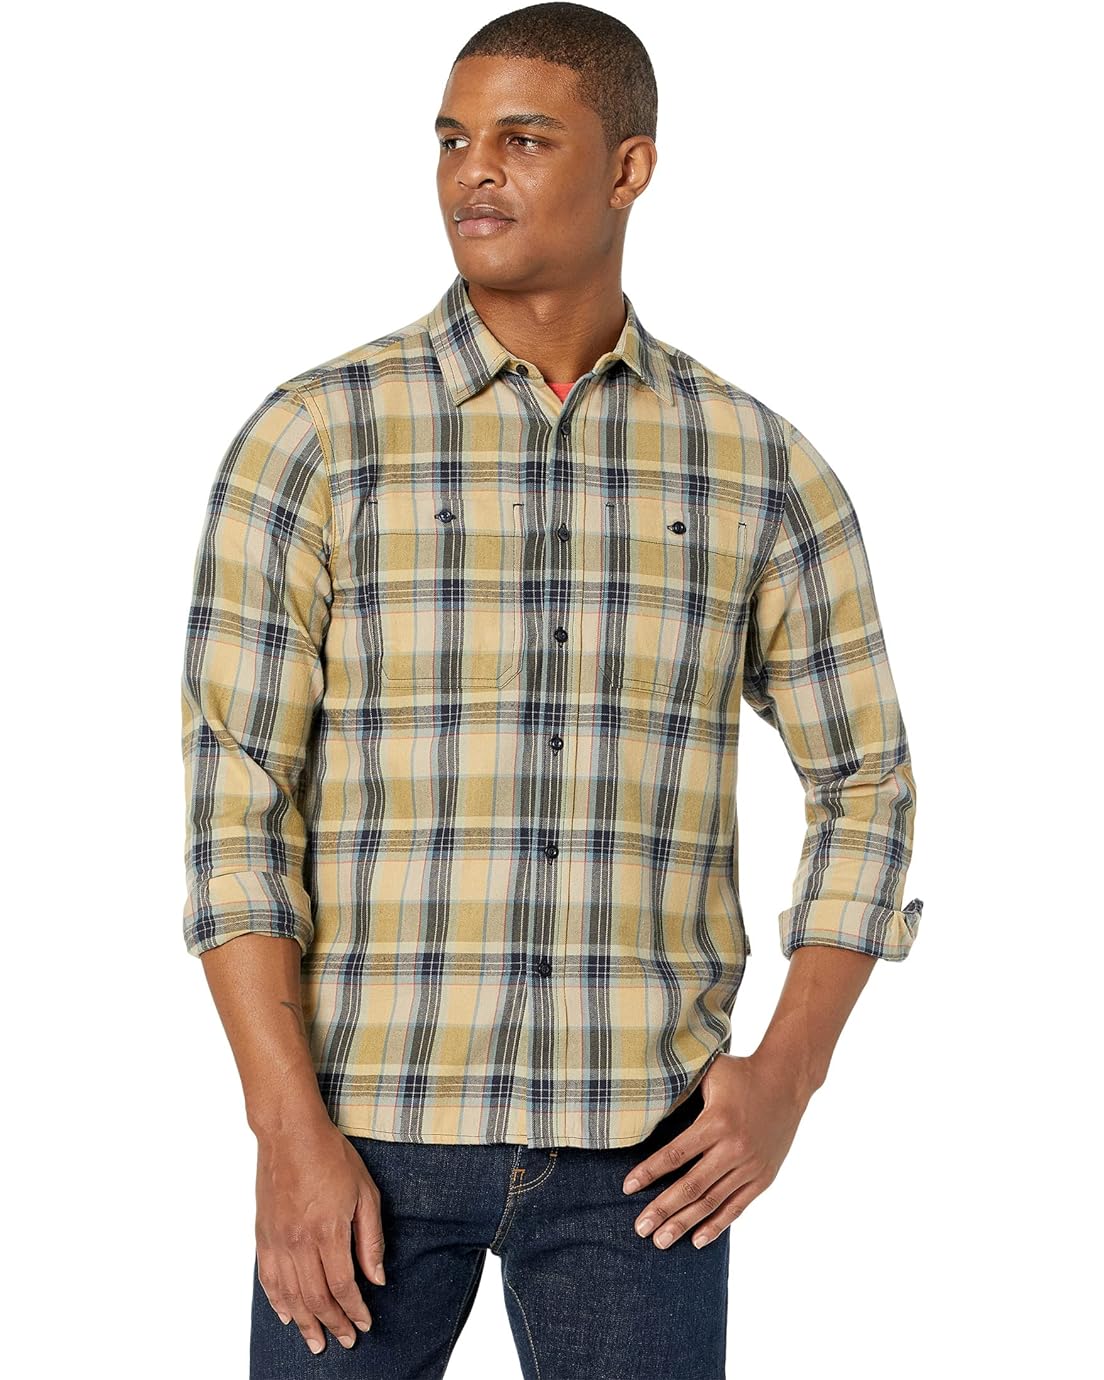 The North Face Arroyo Lightweight Flannel